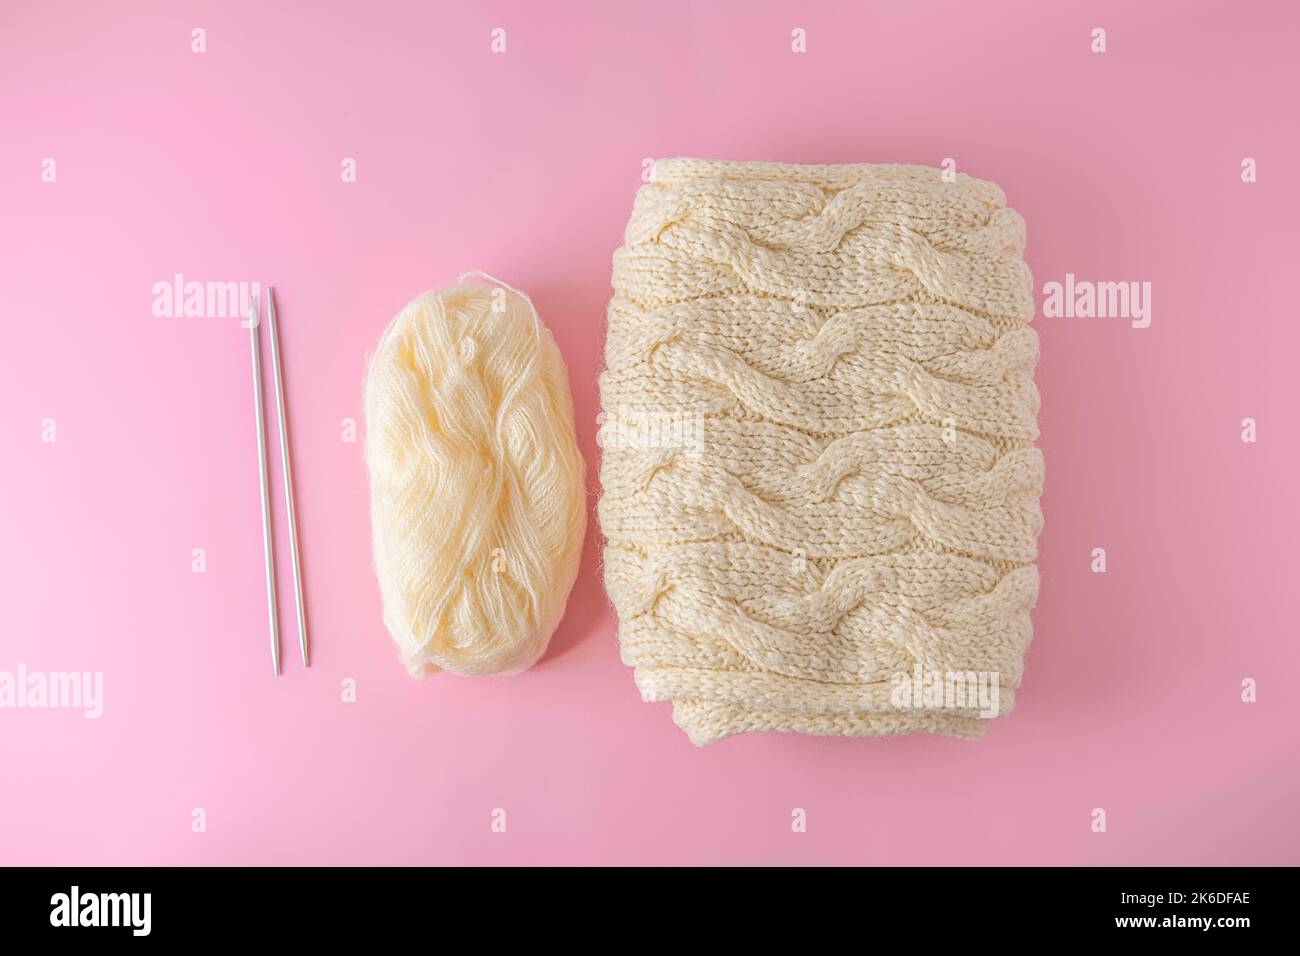 Flat lay with ball of yarn, needles and knitted scarf on light pink background. Handmade and knitting hobby concept Stock Photo